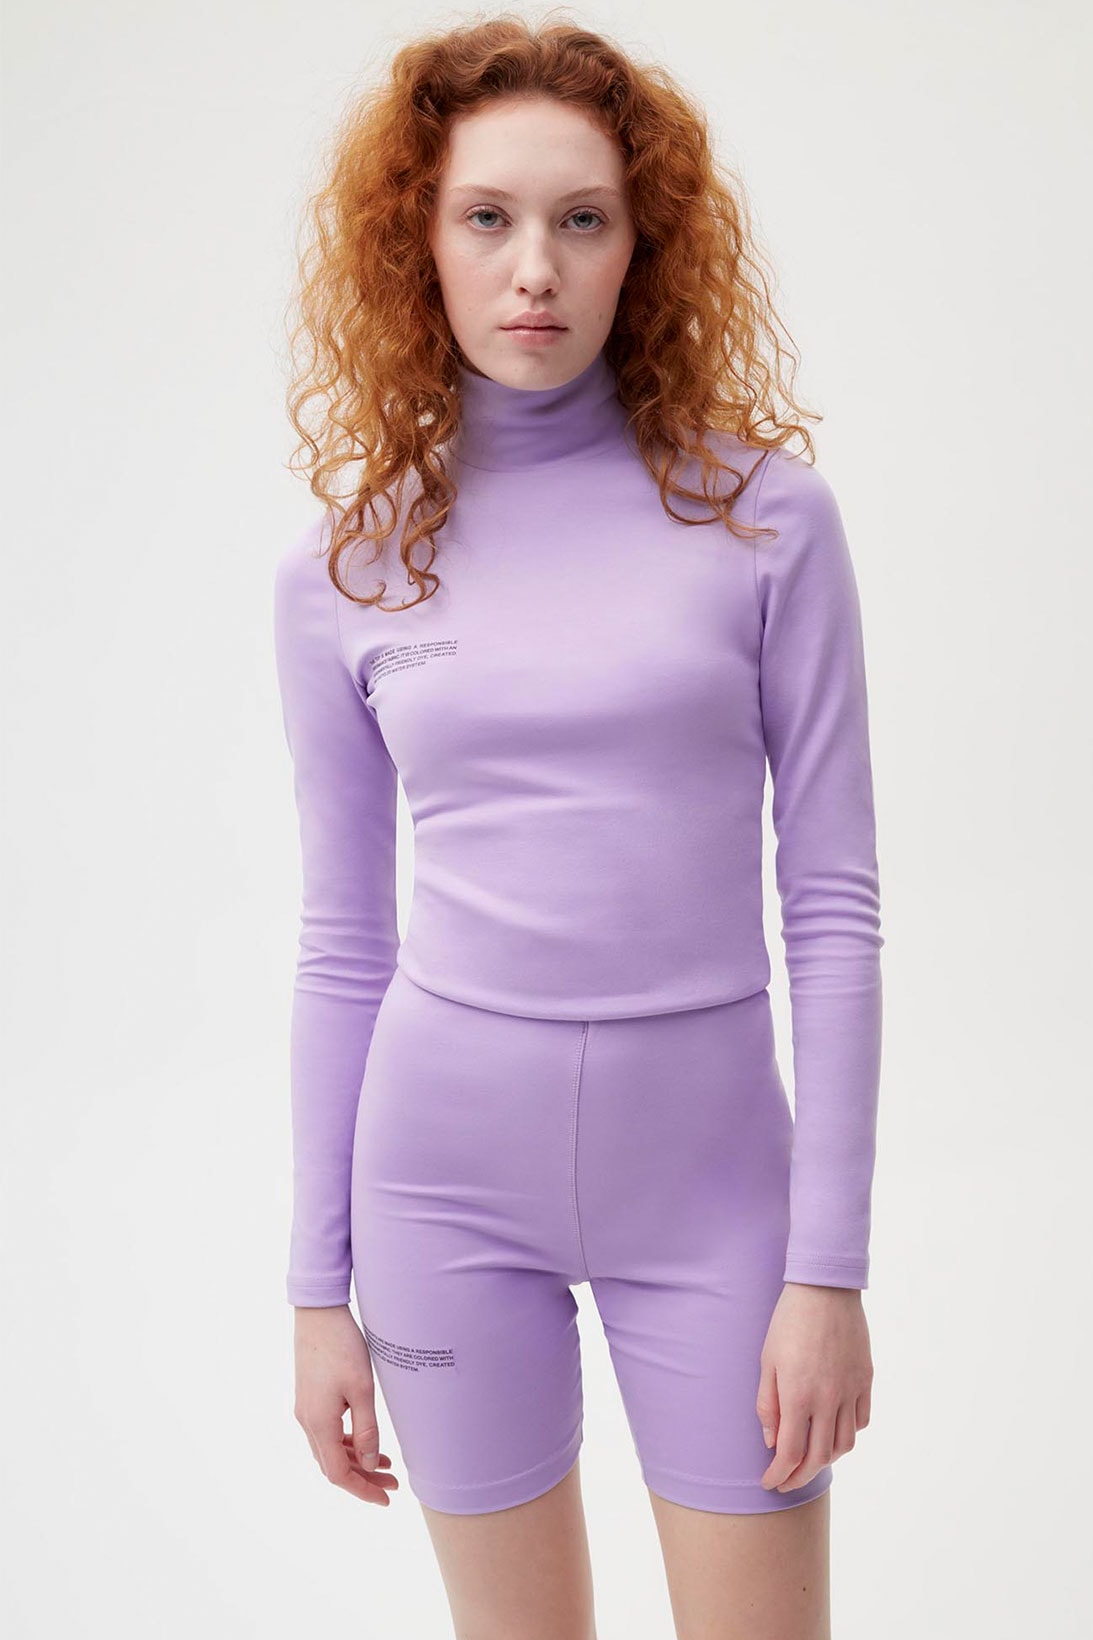 pangaia roica stretch athleisure sustainable collection turtleneck top bike shorts lilac purple